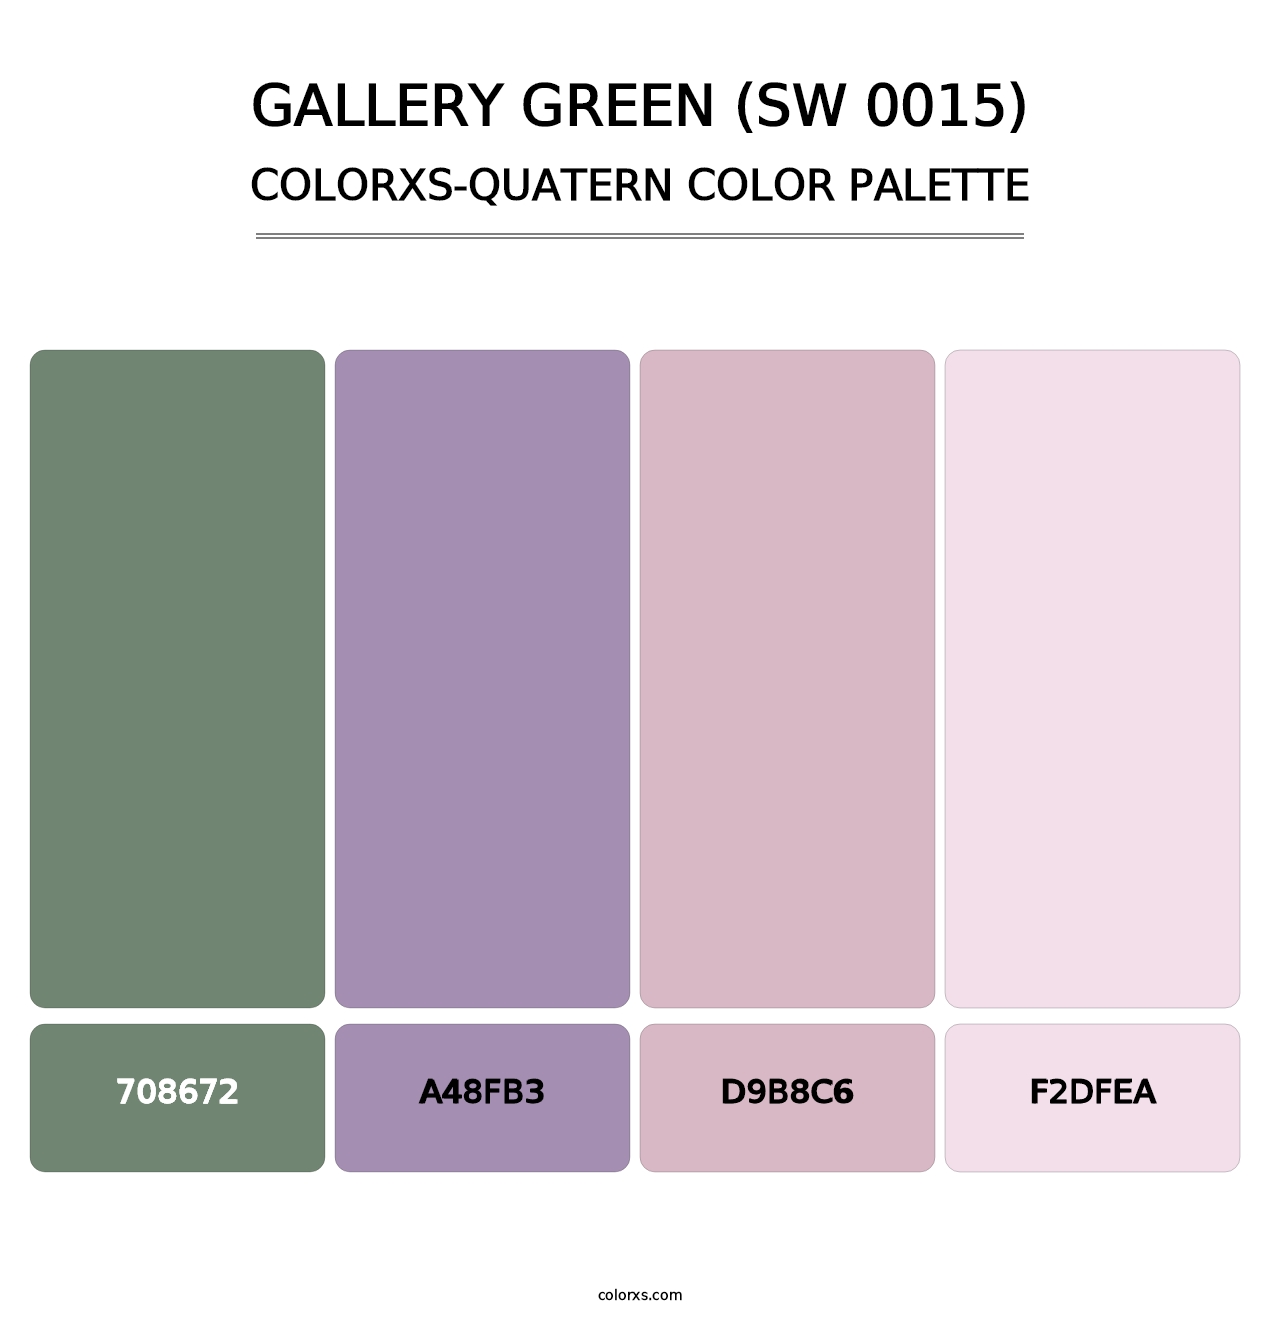 Gallery Green (SW 0015) - Colorxs Quatern Palette